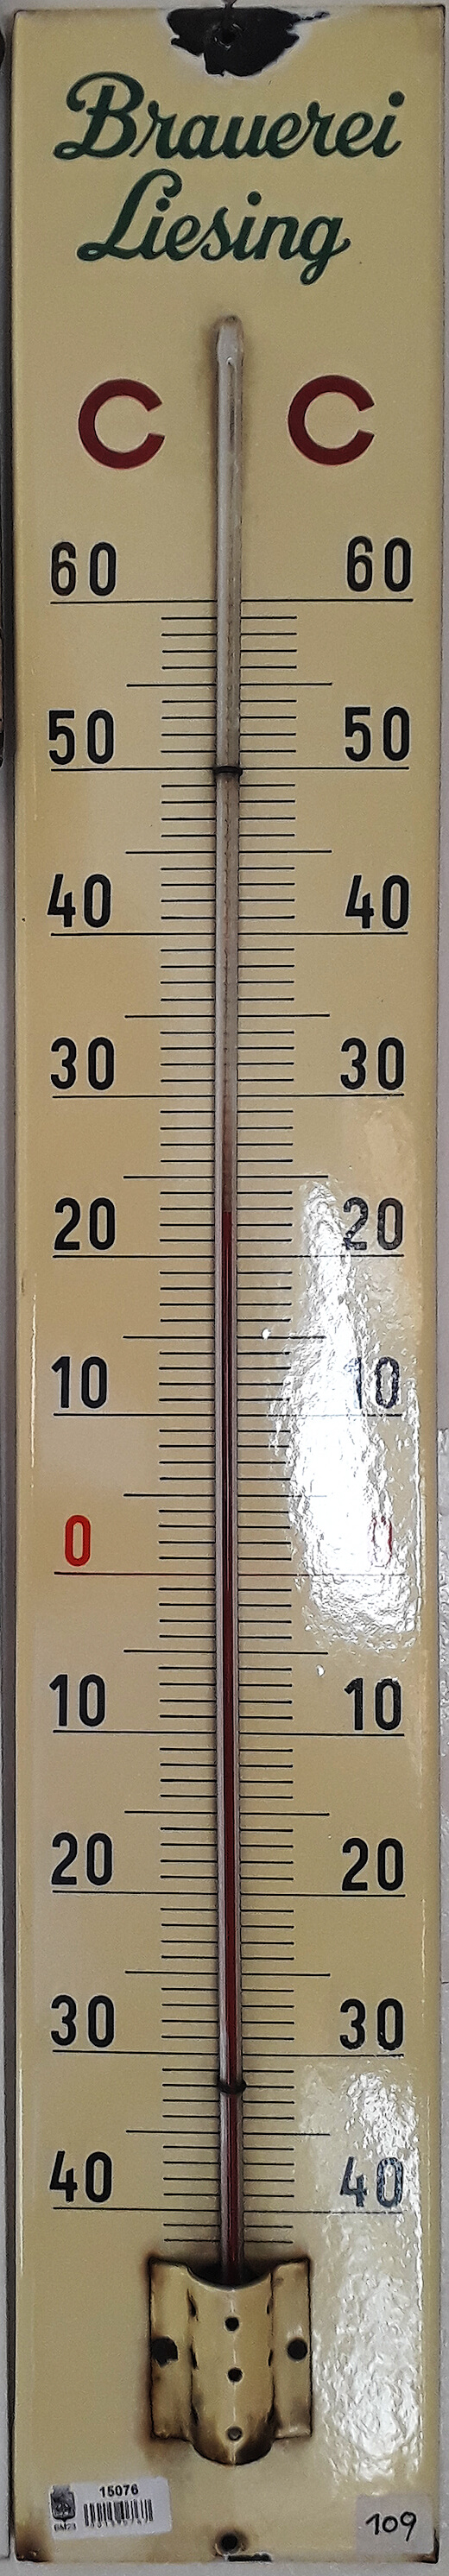 Liesing Thermometer